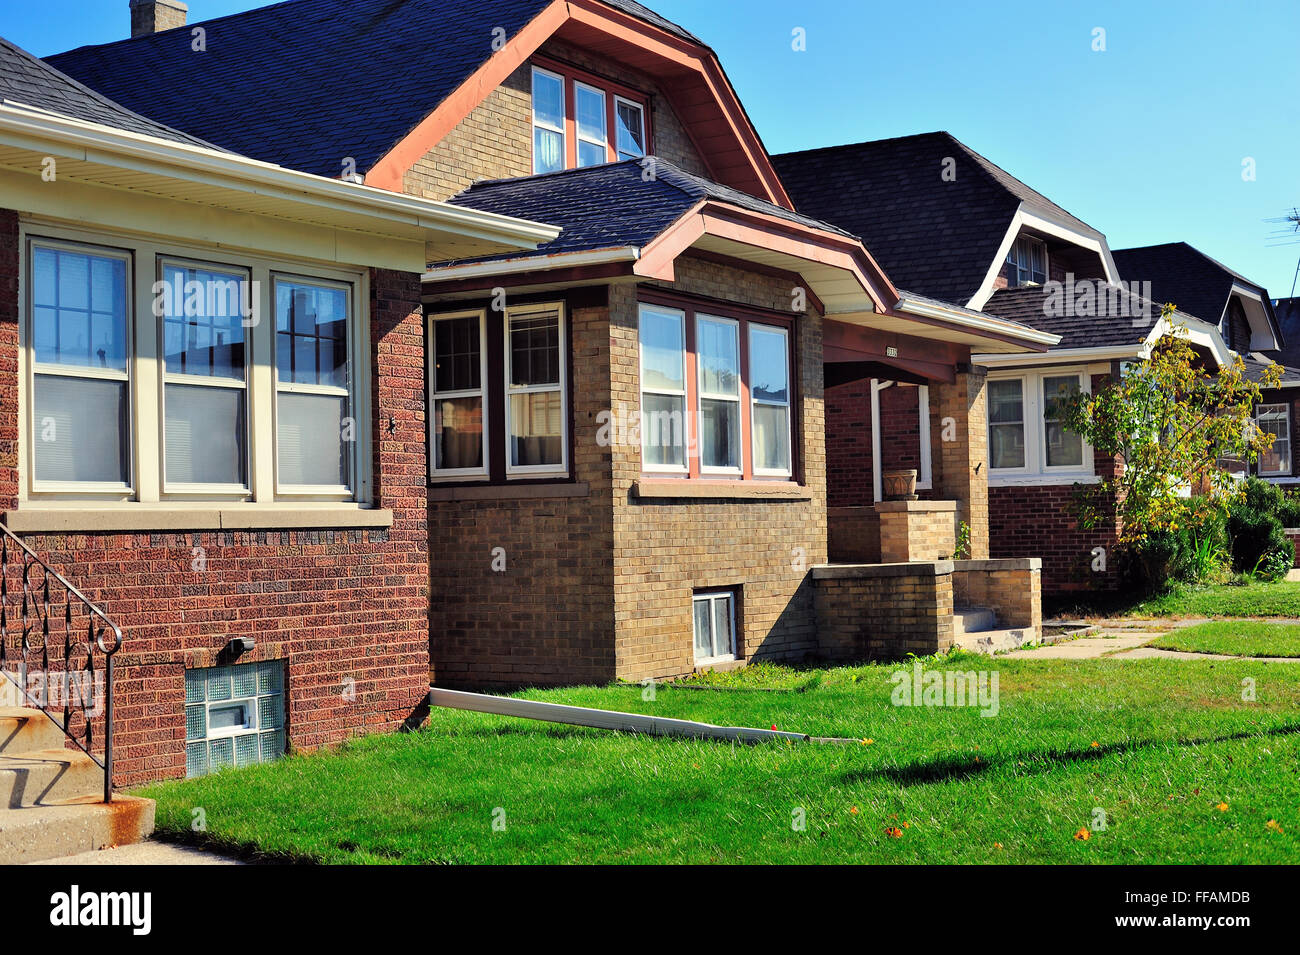 Row of bungalow-styled homes that are typical of many neighborhoods in Milwaukee, Wisconsin, USA. Stock Photo